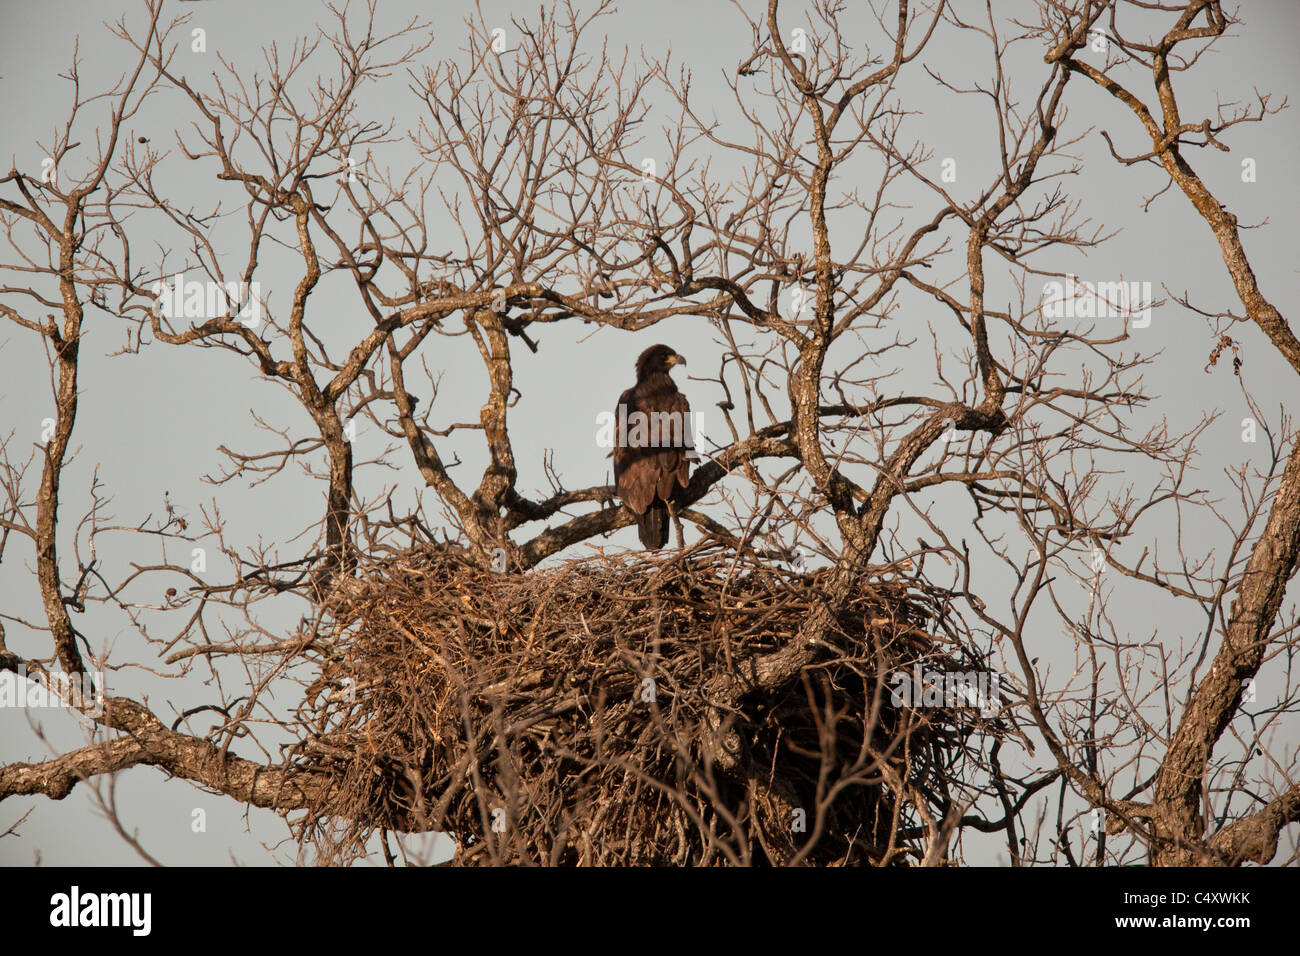 Juvenile bald eagle at its nest, filled with fledglings, in pecan tree in early spring near Llano TX Stock Photo